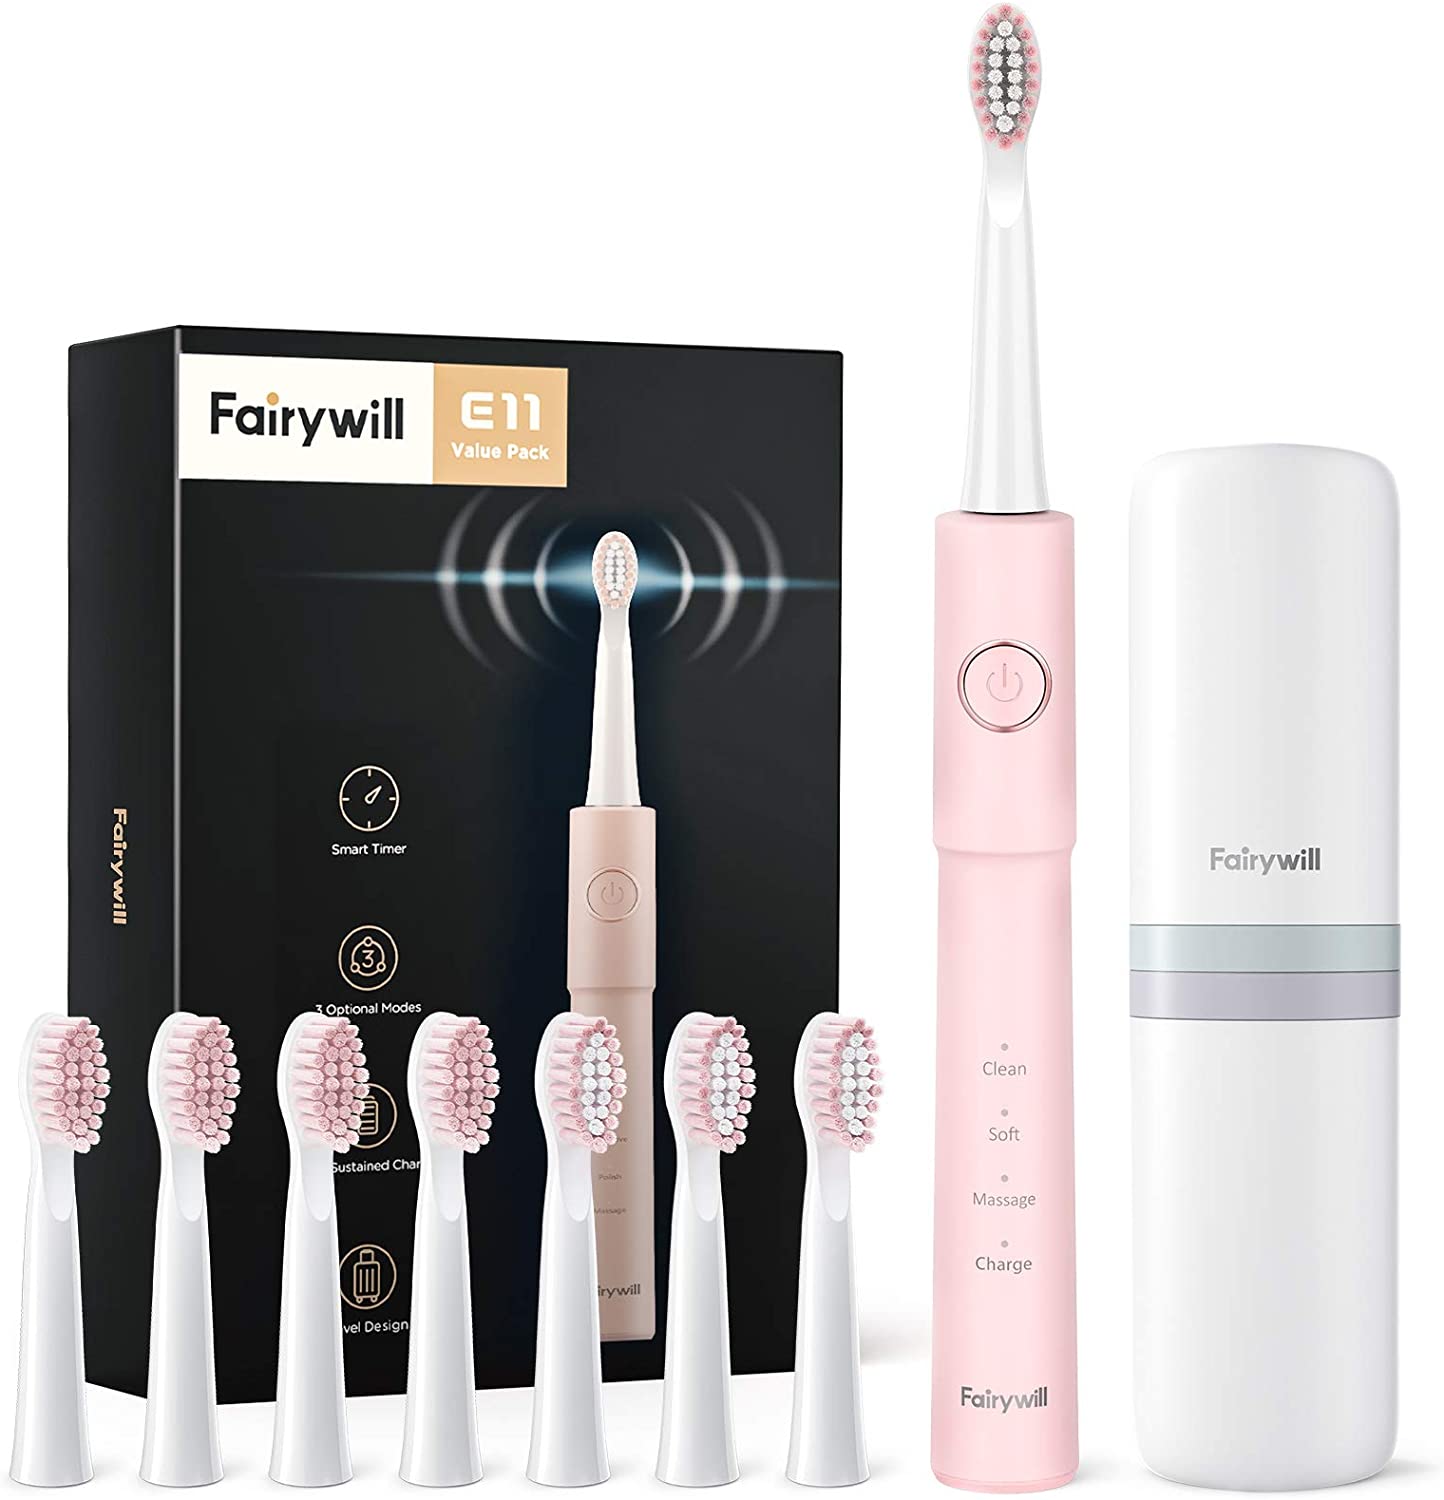 Fairywill Sonic Electric Toothbrush E11 Waterproof USB Charge Rechargeable Electric Toothbrush 8 Brush Replacement Heads Adult